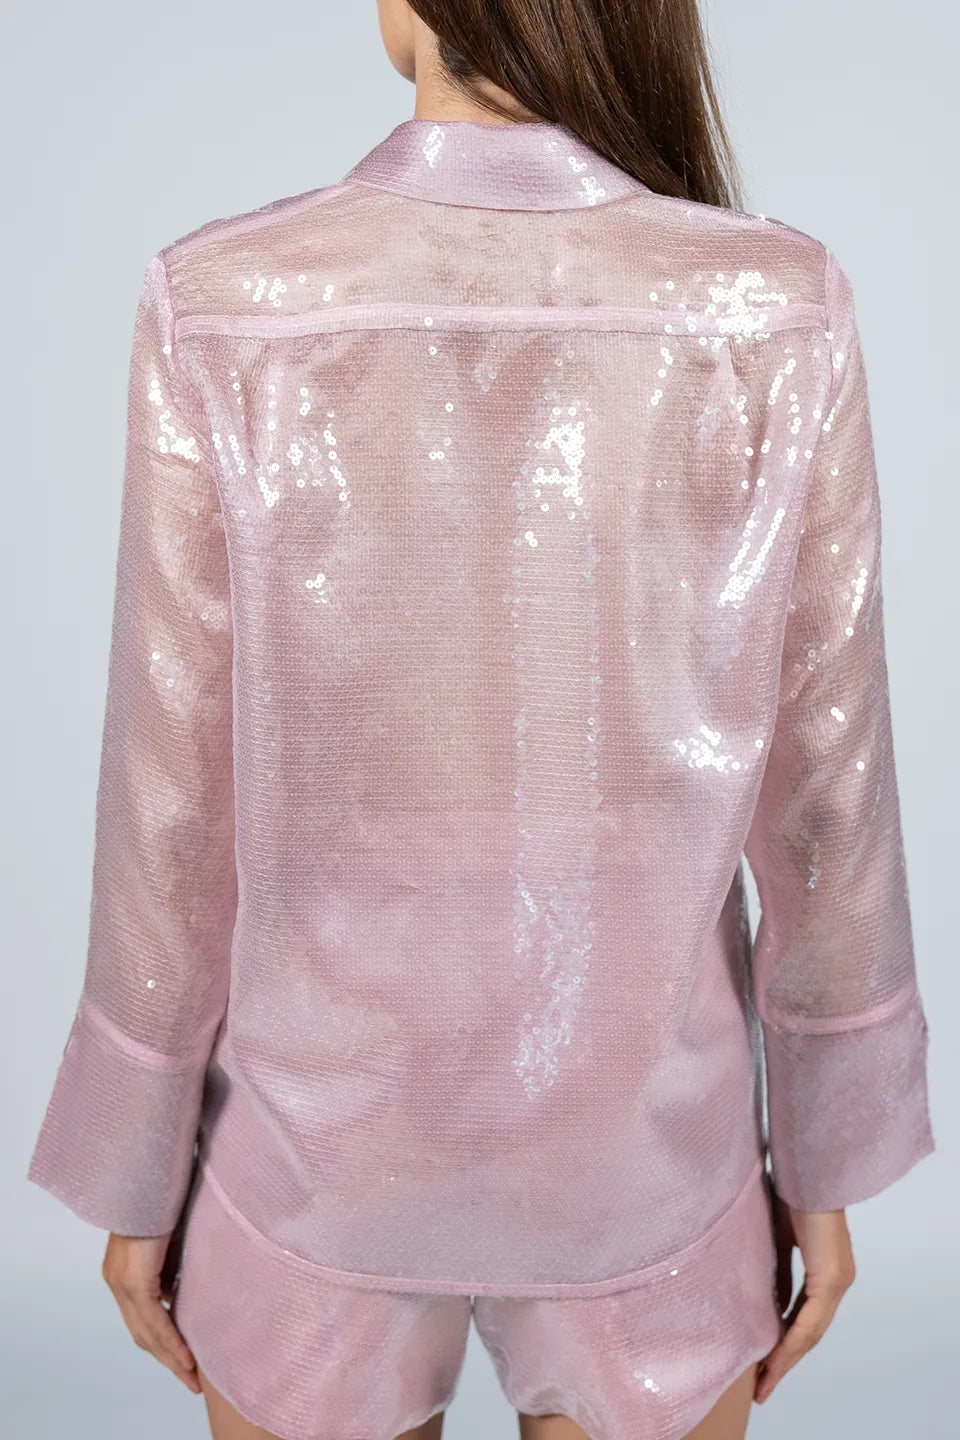 Designer Pink Shirt, shop online with free delivery in UAE. Product gallery 5